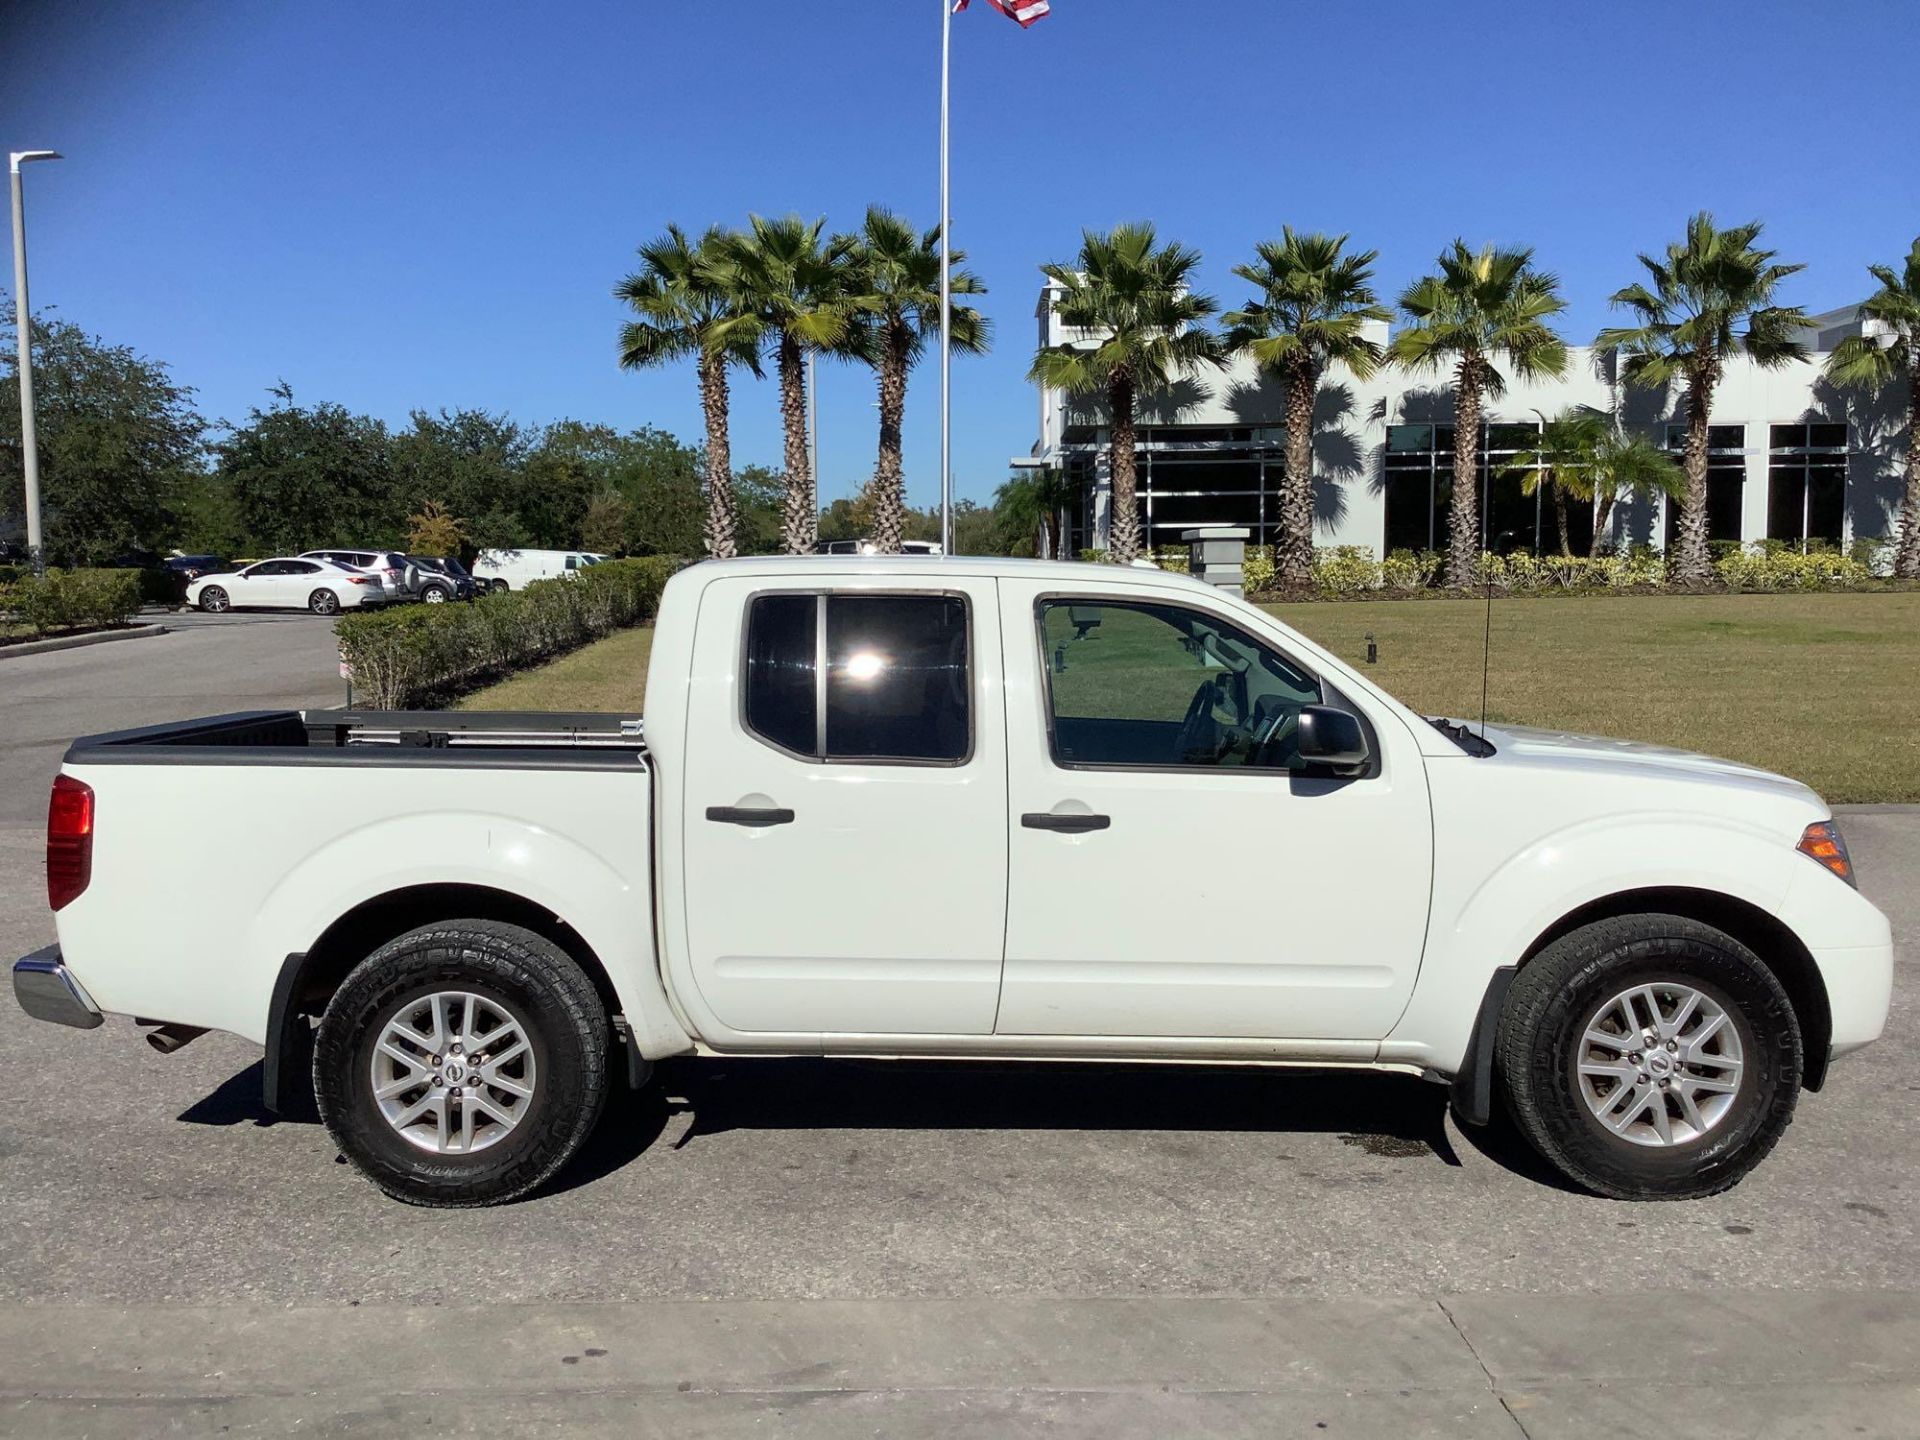 2017 NISSAN FRONTIER PICKUP TRUCK, GAS ENGINE, AUTOMATIC TRANSMISSION, CREW CAB, 4 DOOR, A/C , POWER - Image 3 of 24